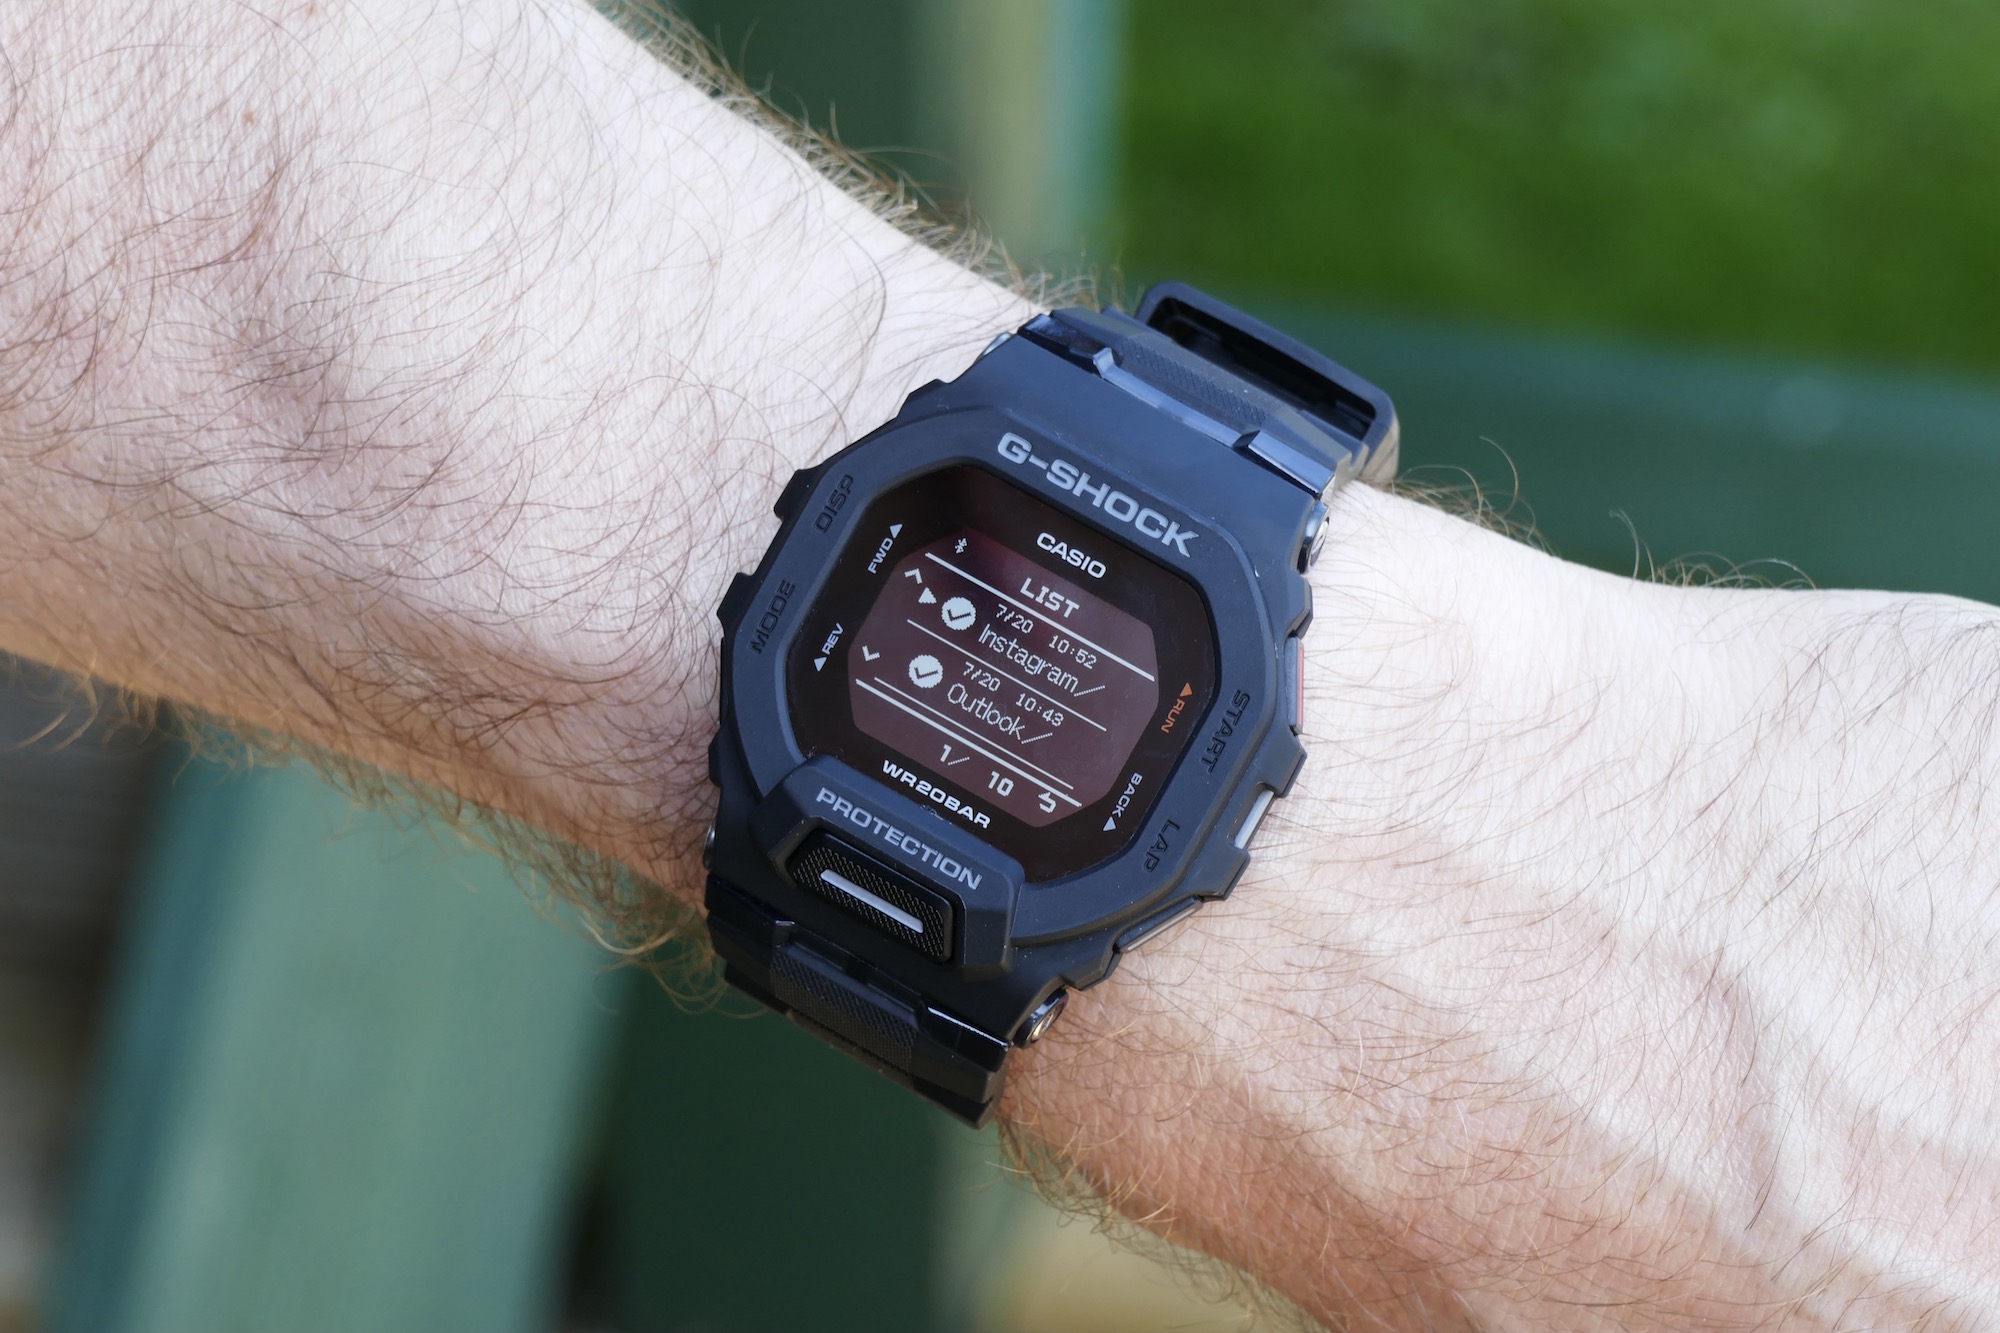 Balanced G-Shock Digital Casio | Perfectly GBD-200 Review: Trends